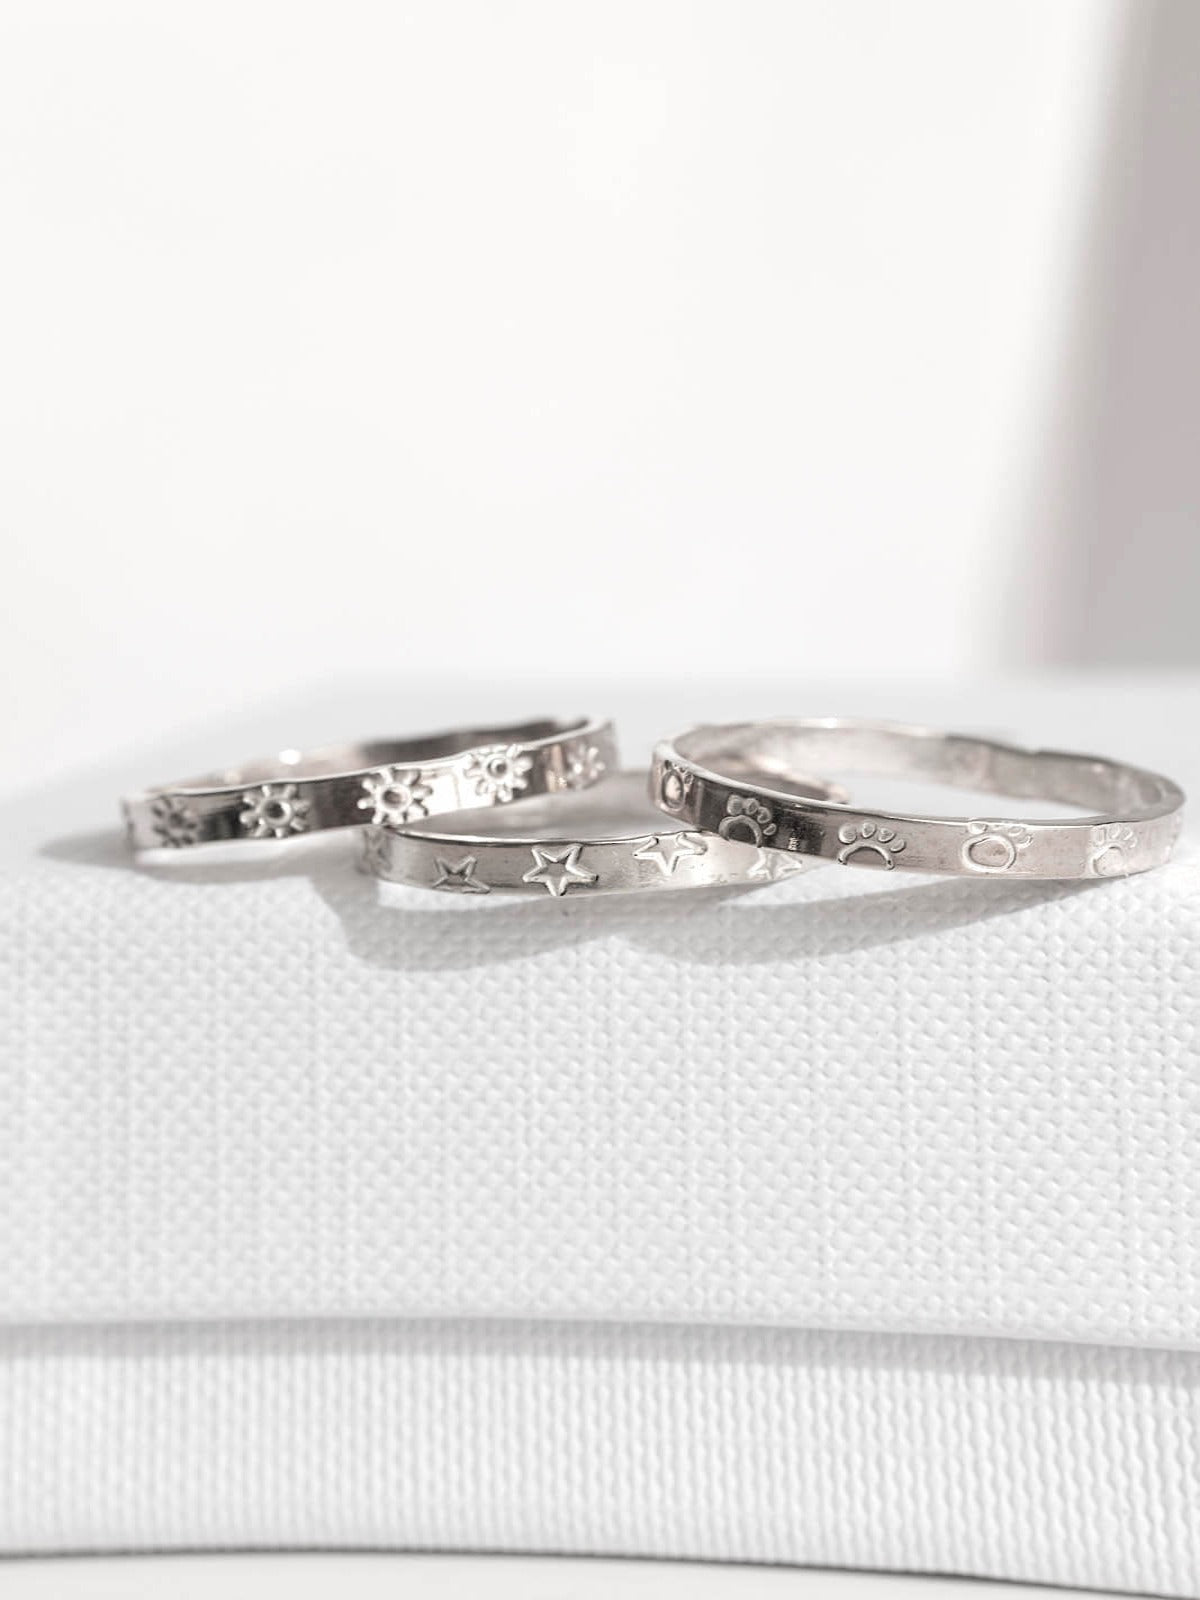 Infinity ring band with symbols sterling silver